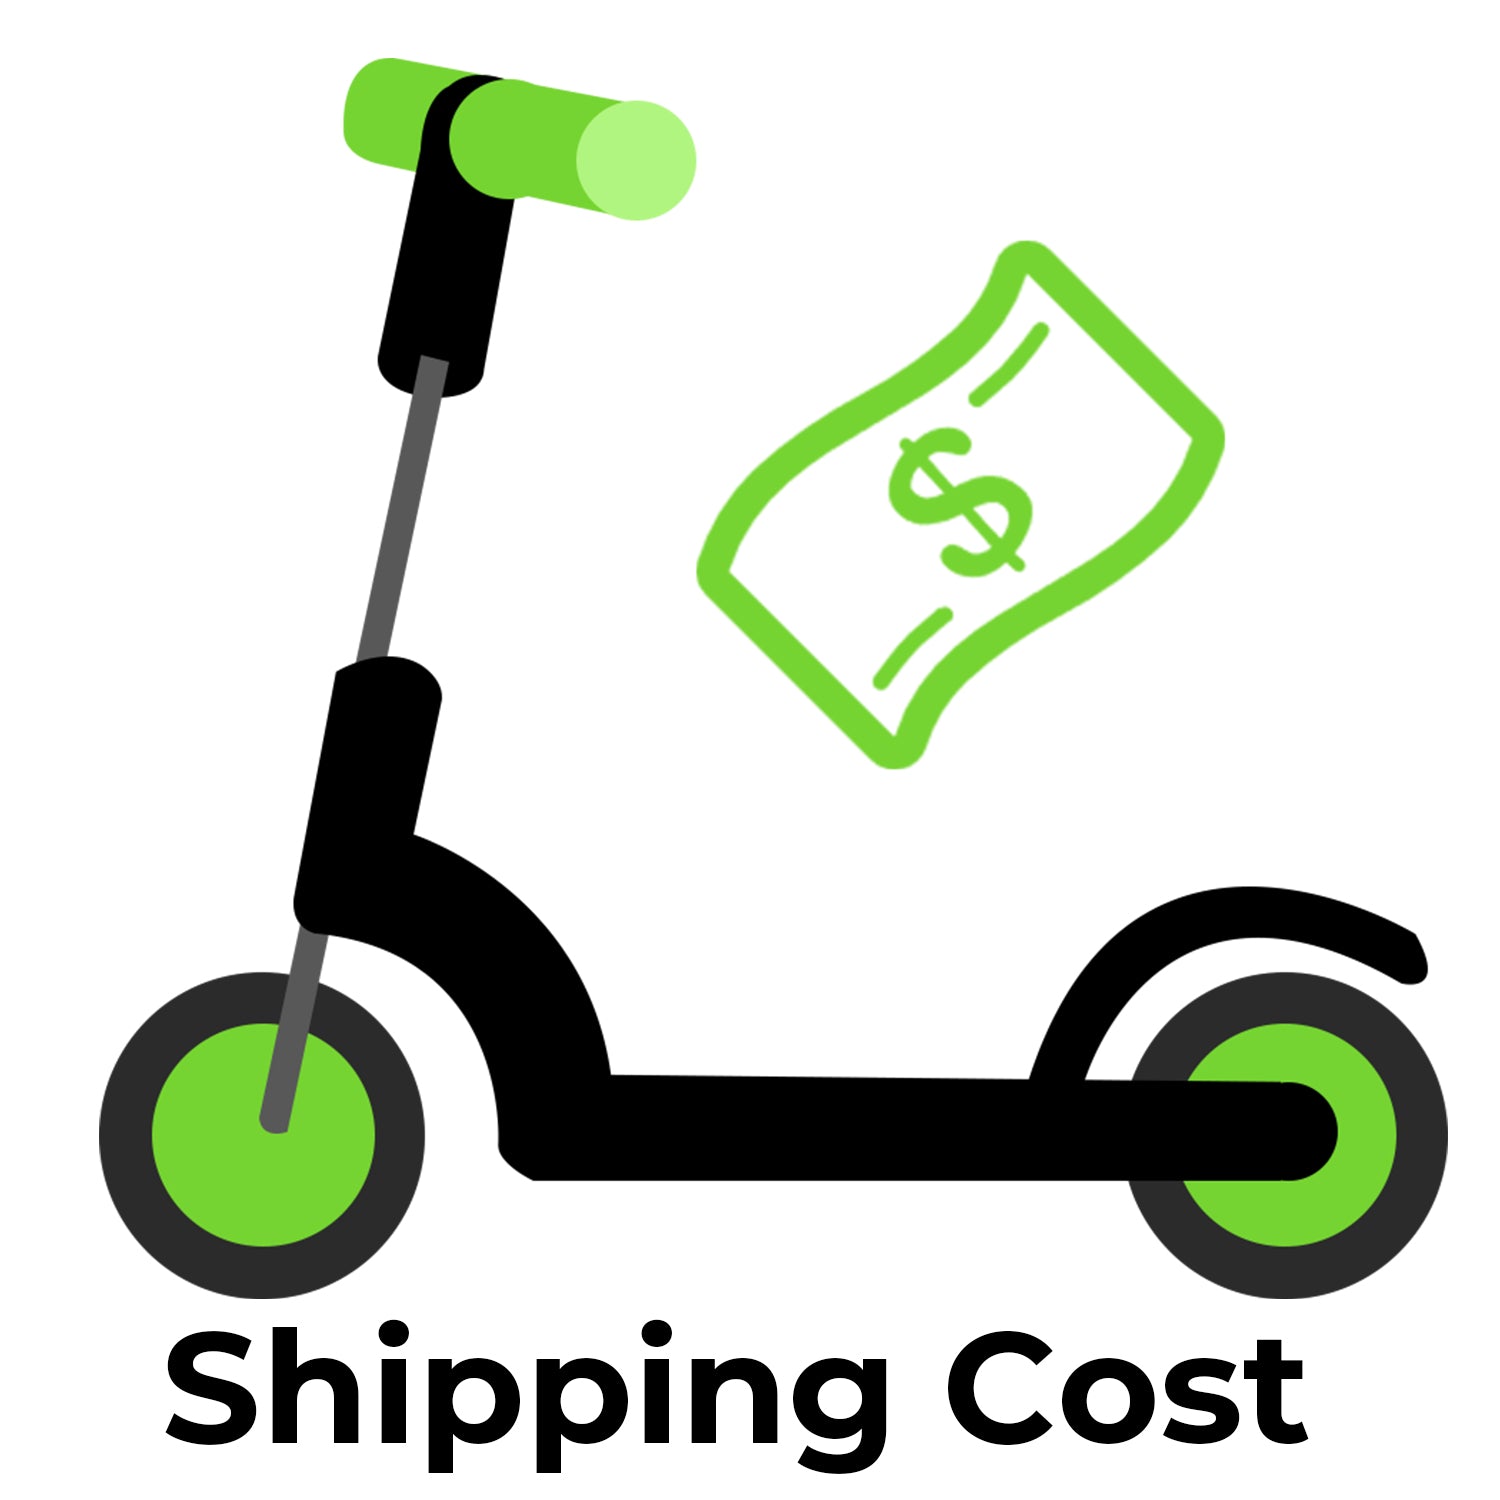 The money for new scooter